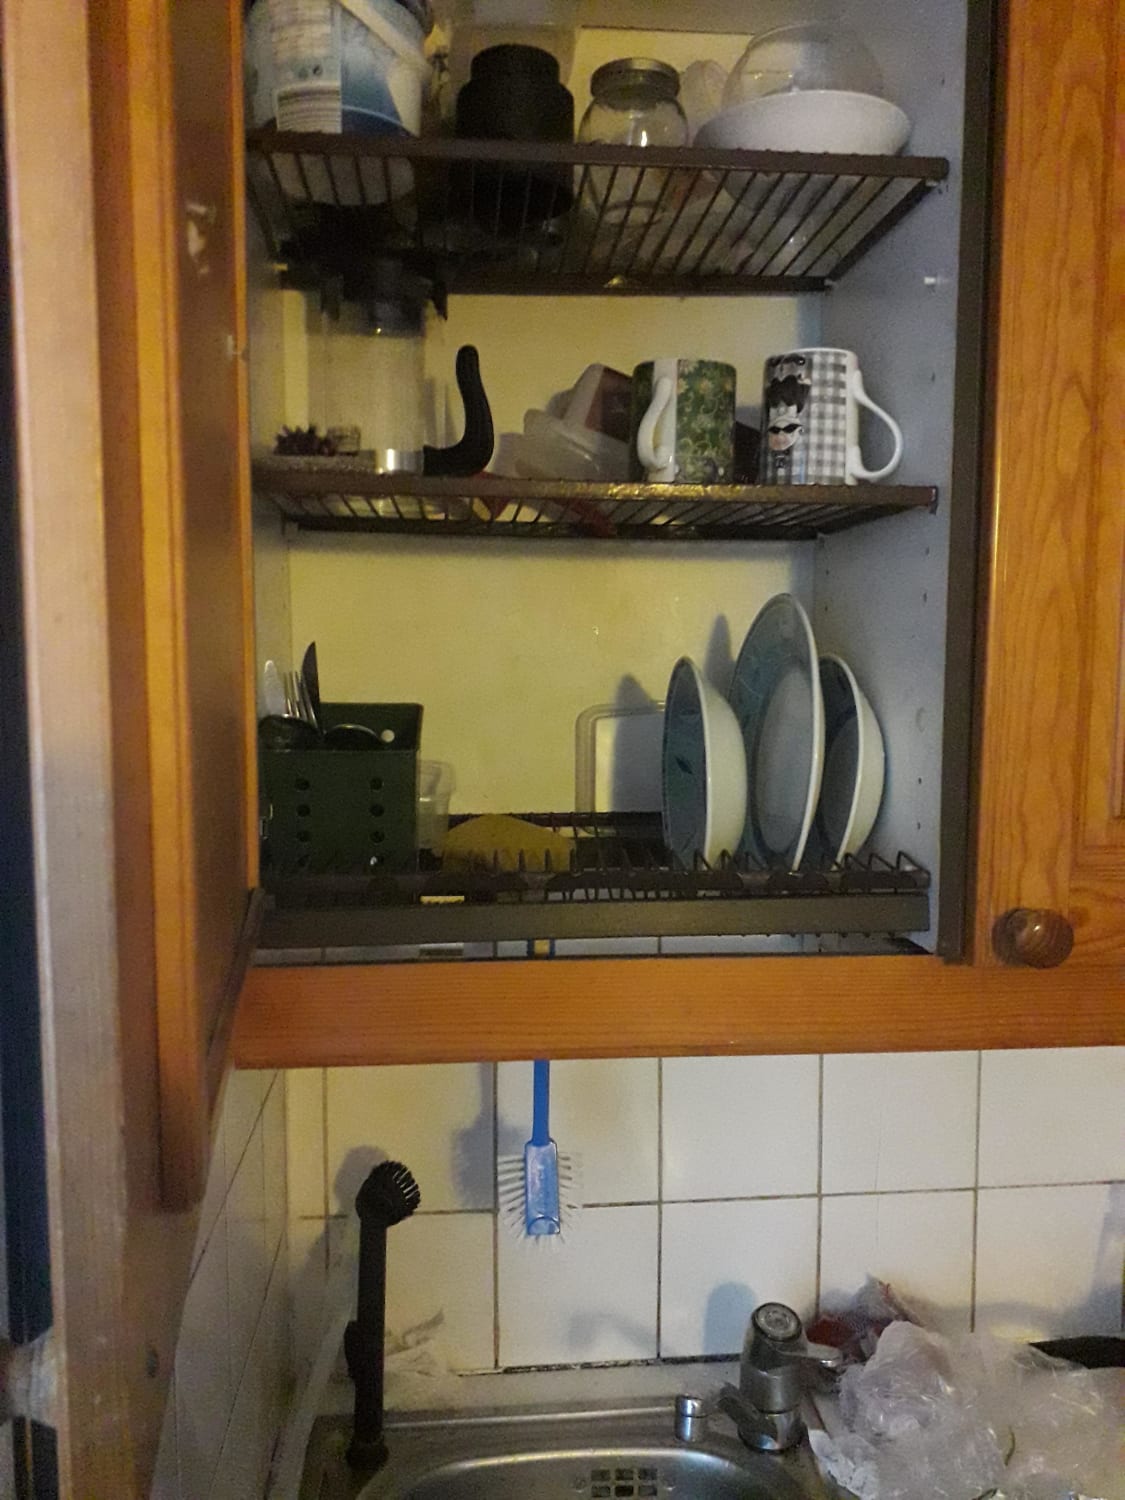 In Finland they place these drawers to dry over the kitchen sink